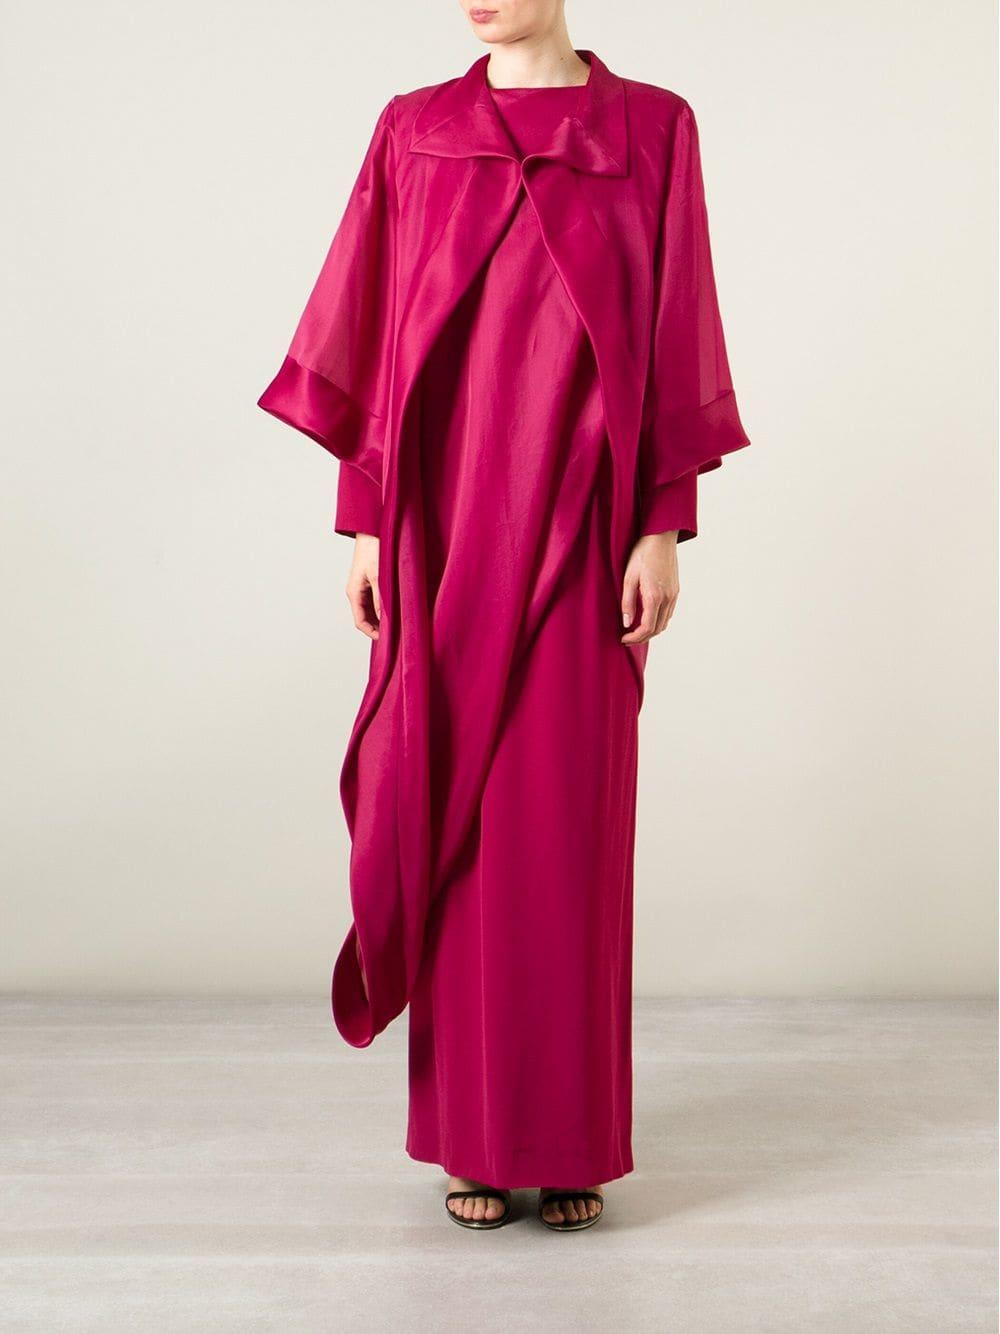 Lovely fuchsia asymmetric chiffon gown by Givenchy, featuring a round neck, a spread collar, wide three quarter length sleeves, a layered design, a ruffled design and a straight skirt.

Years: 1990s

Made in FRANCE 

Size: 42 FR

Linear